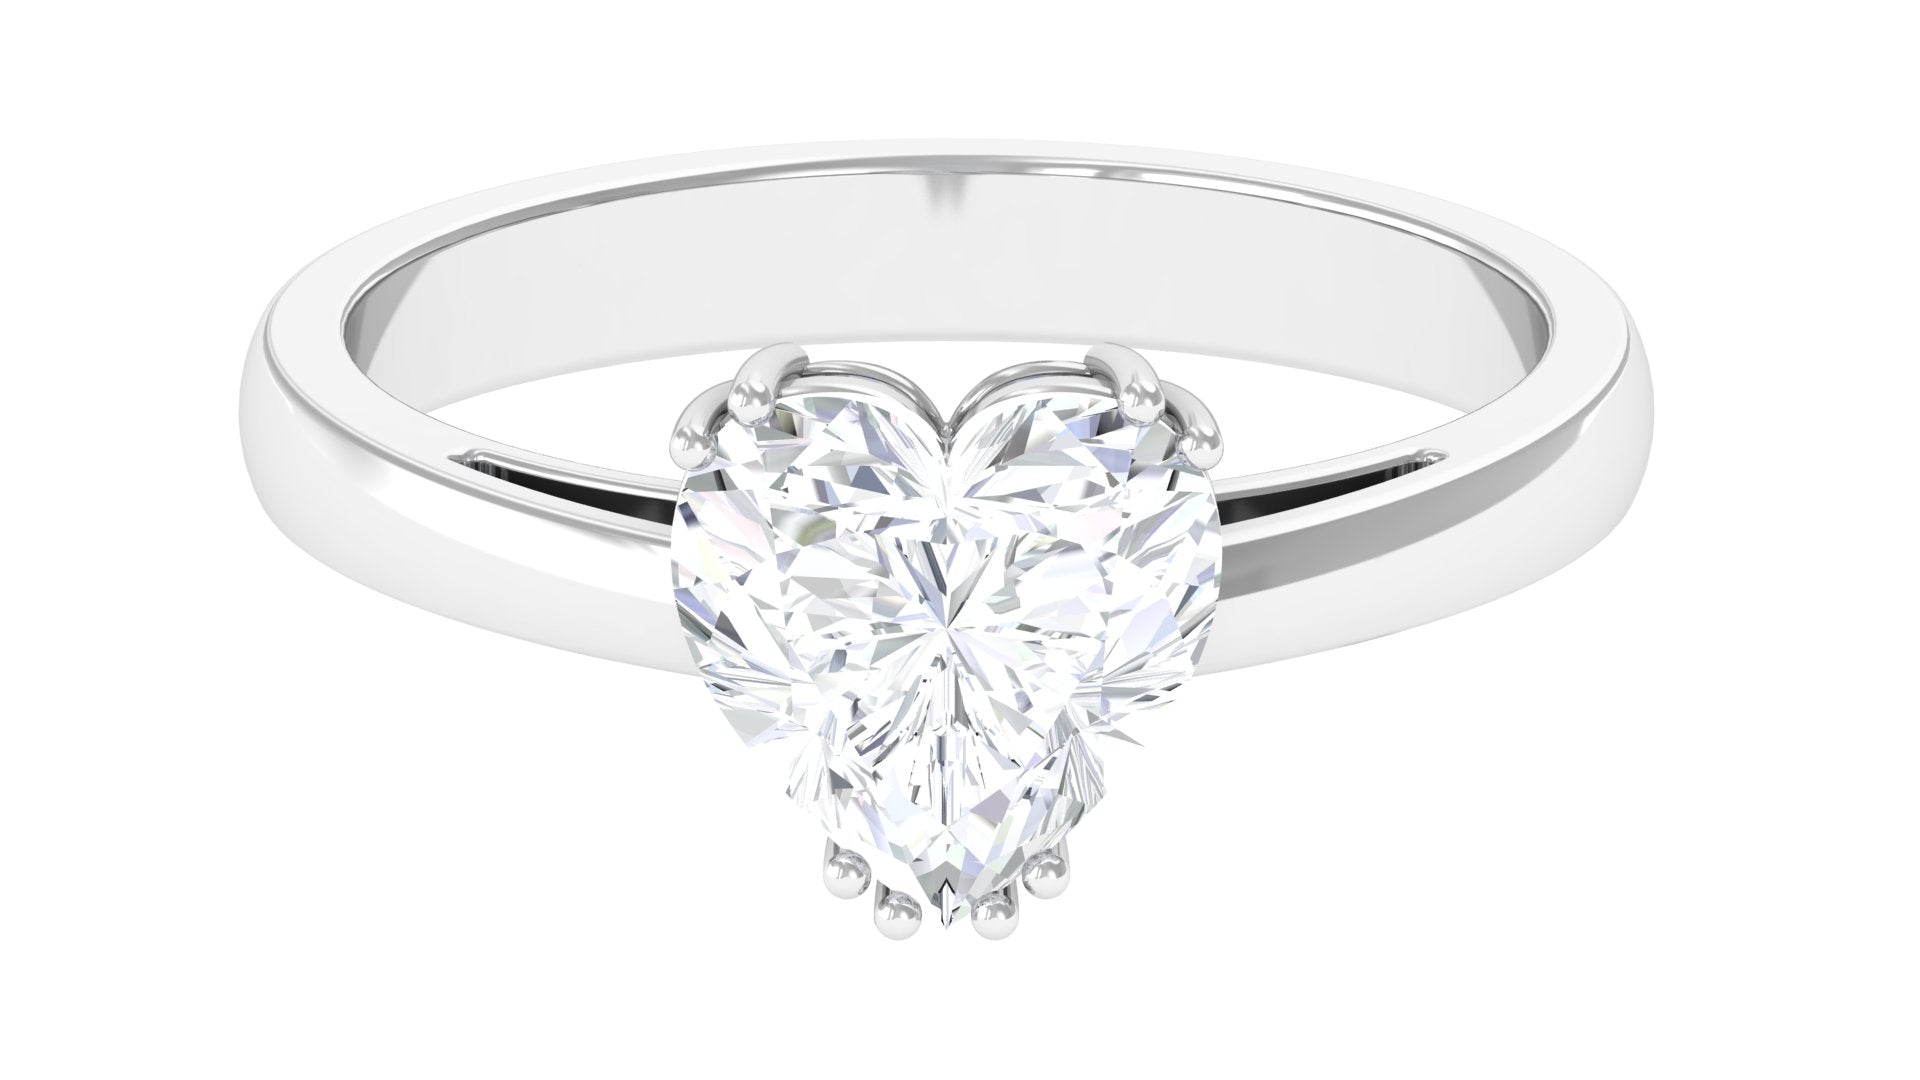 Certified Moissanite Solitaire Heart Engagement Ring Moissanite - ( D-VS1 ) - Color and Clarity - Rosec Jewels